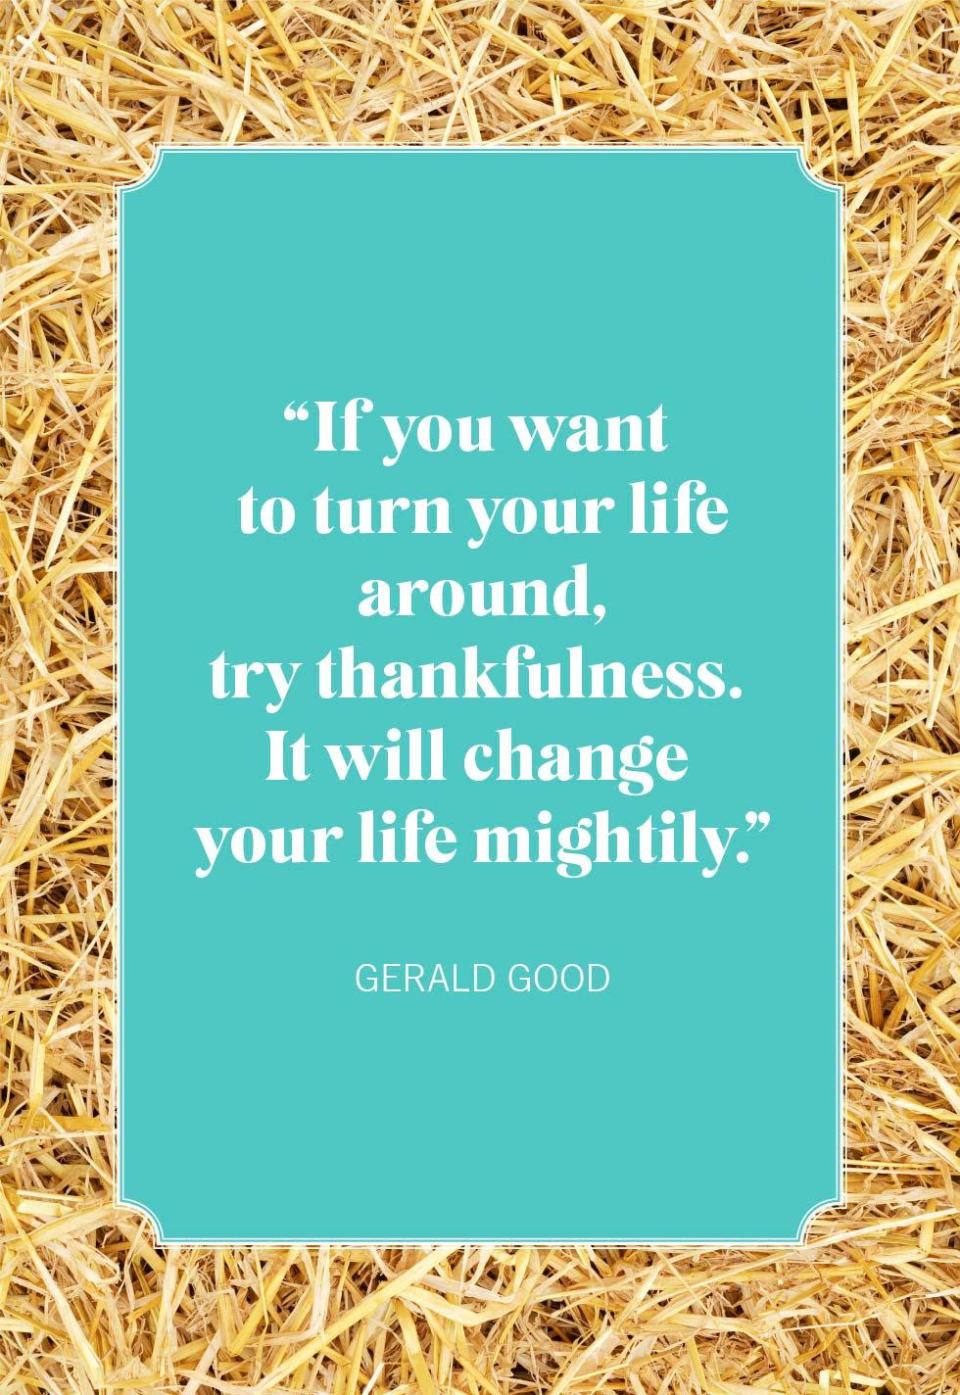 <p>"If you want to turn your life around, try thankfulness. It will change your life mightily."</p>